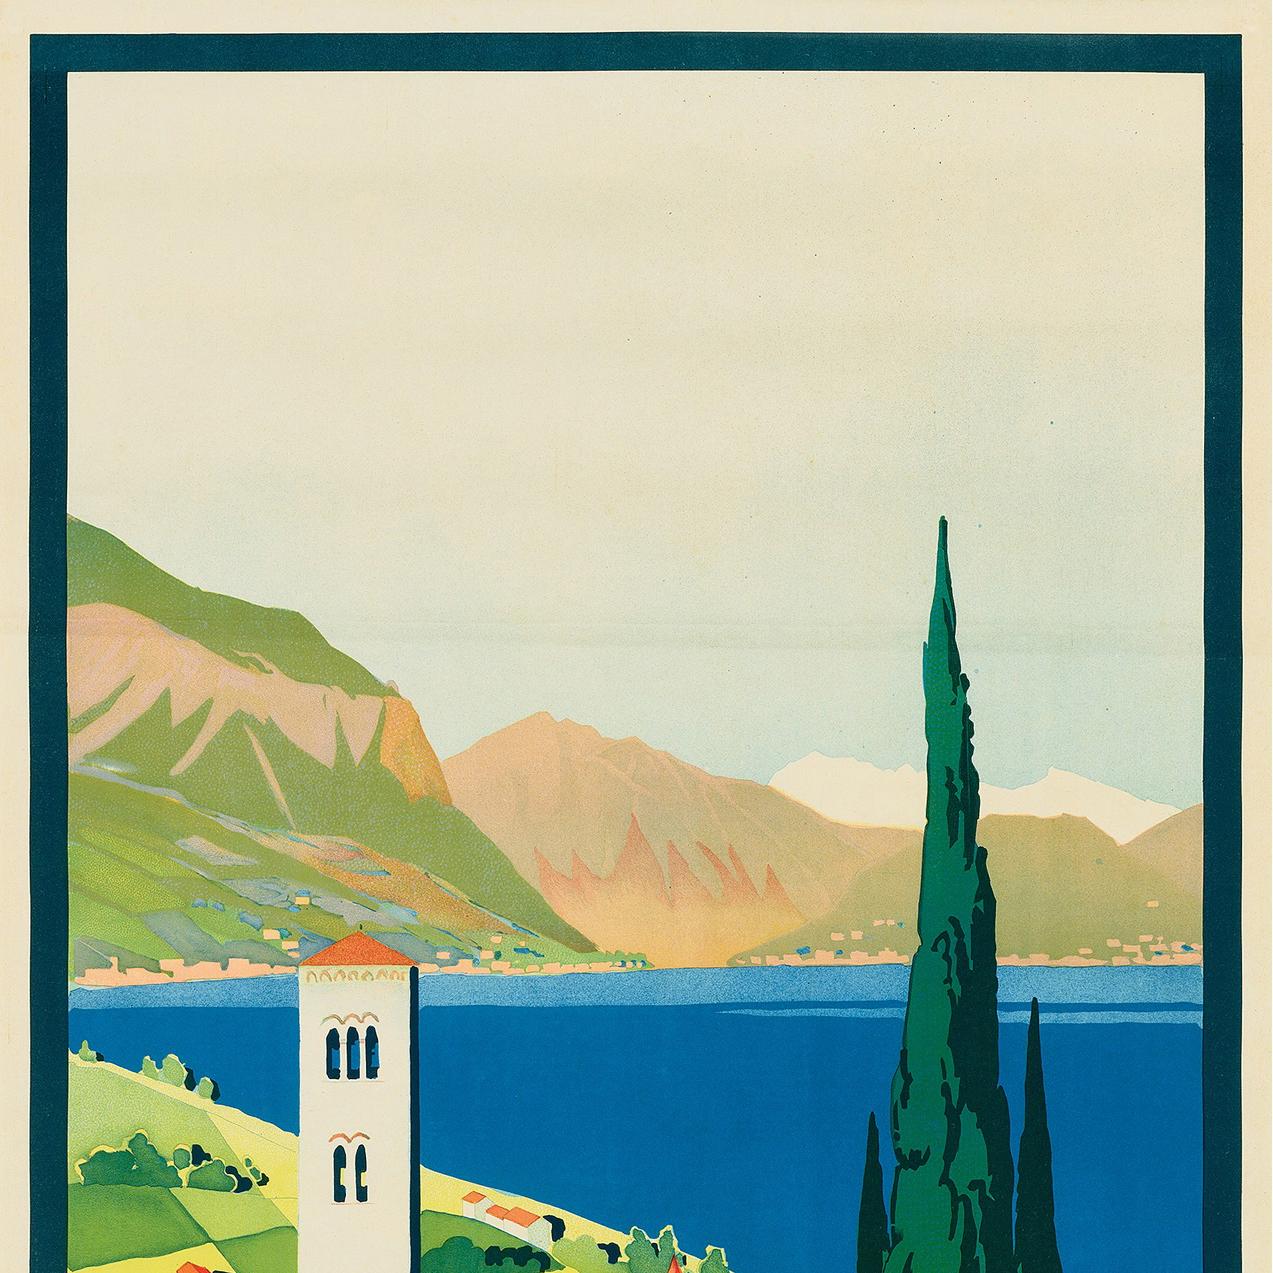 Original vintage travel poster for the Oberitalienische Seen / Northern Italian Lakes featuring a stunning Art Deco view past a tall tree and village on the coastline towards hills and mountains on the horizon across the clear blue lake below a grey